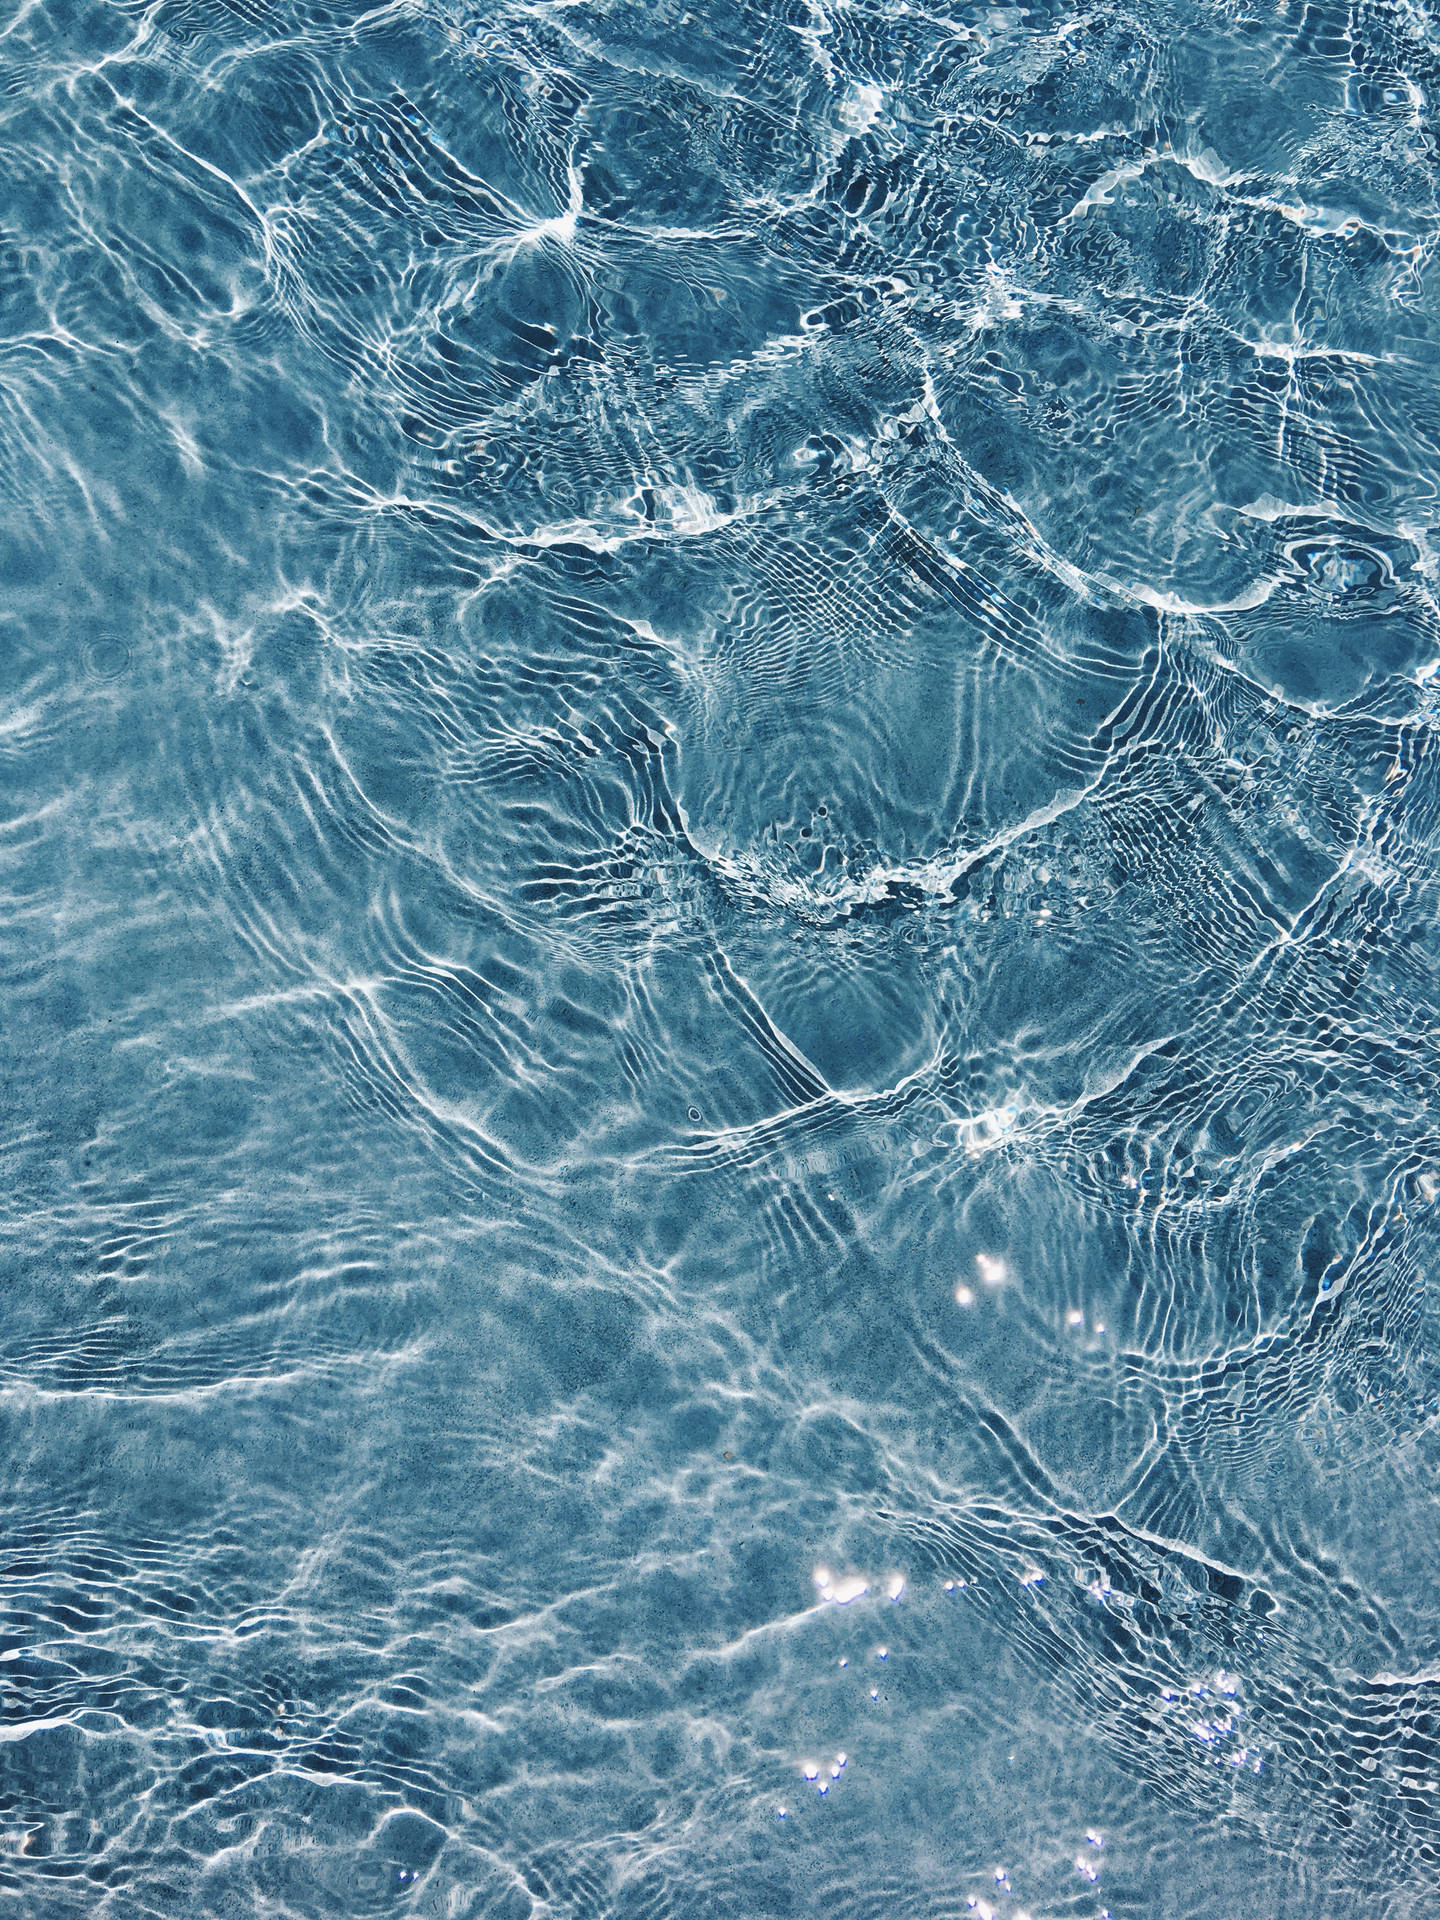 Discover Inner Contemplation And Serenity In A Rippling Pool Of Water. Background